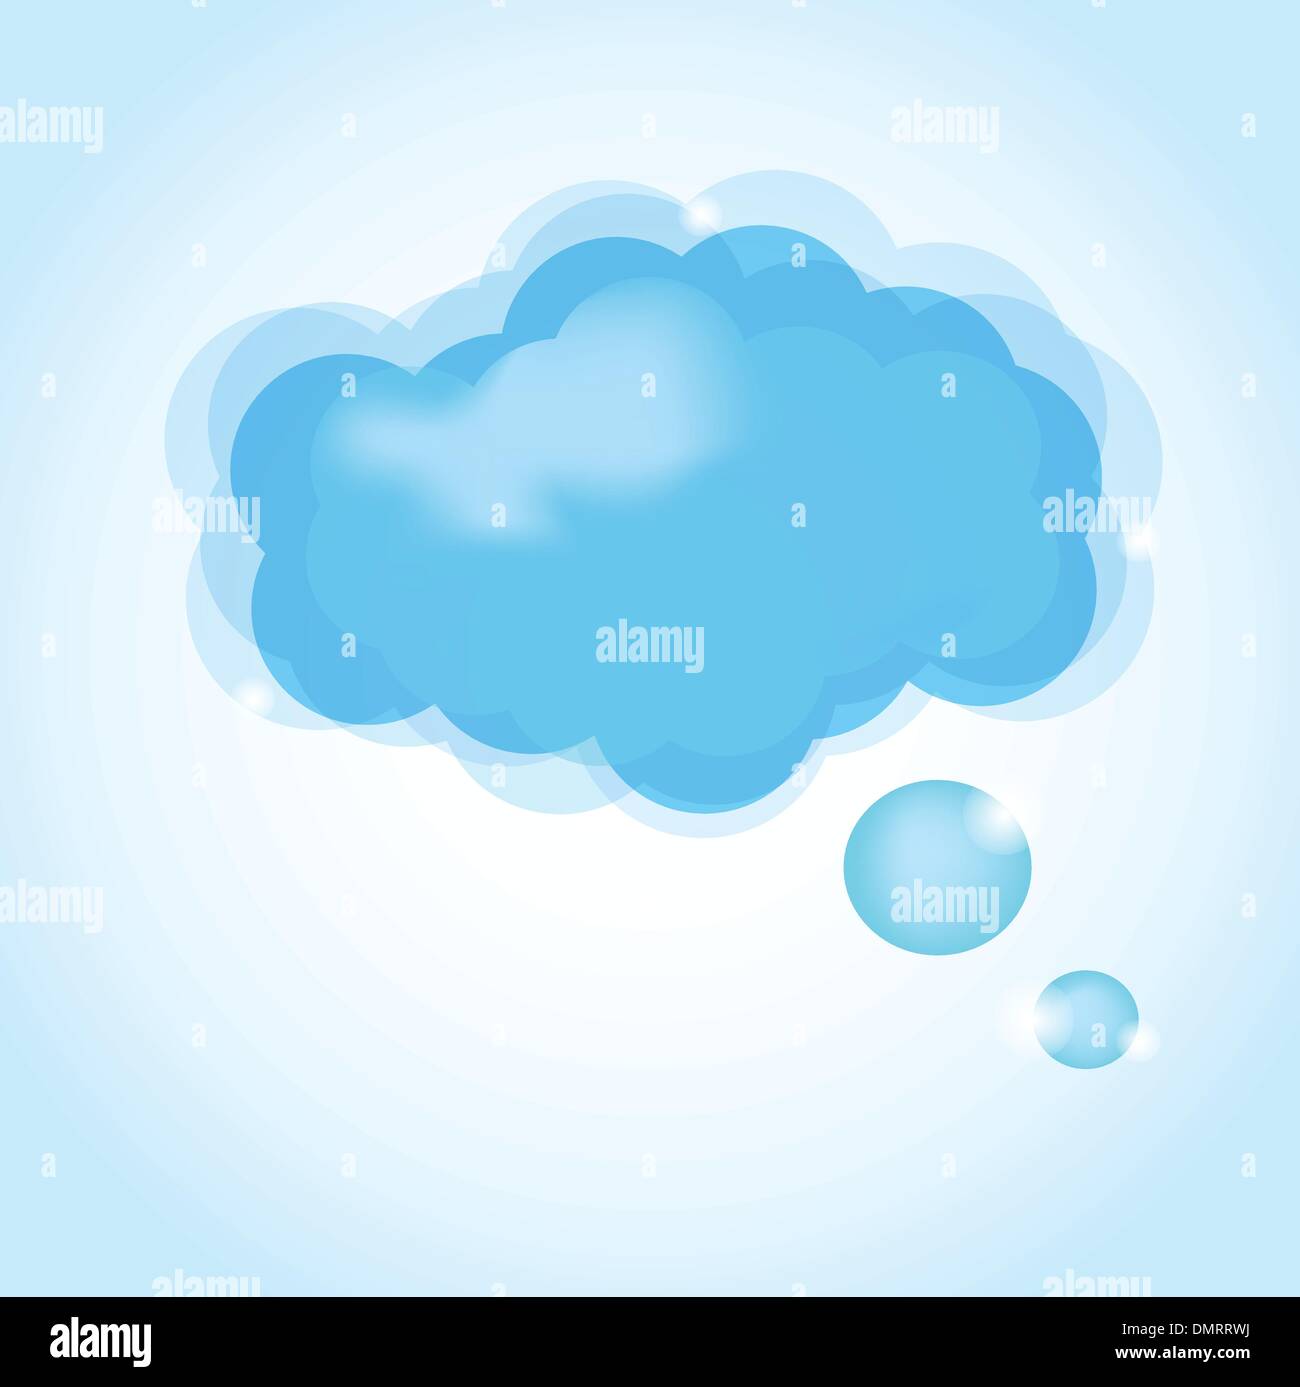 Cloud glossy icon. Vector illustration Stock Vector